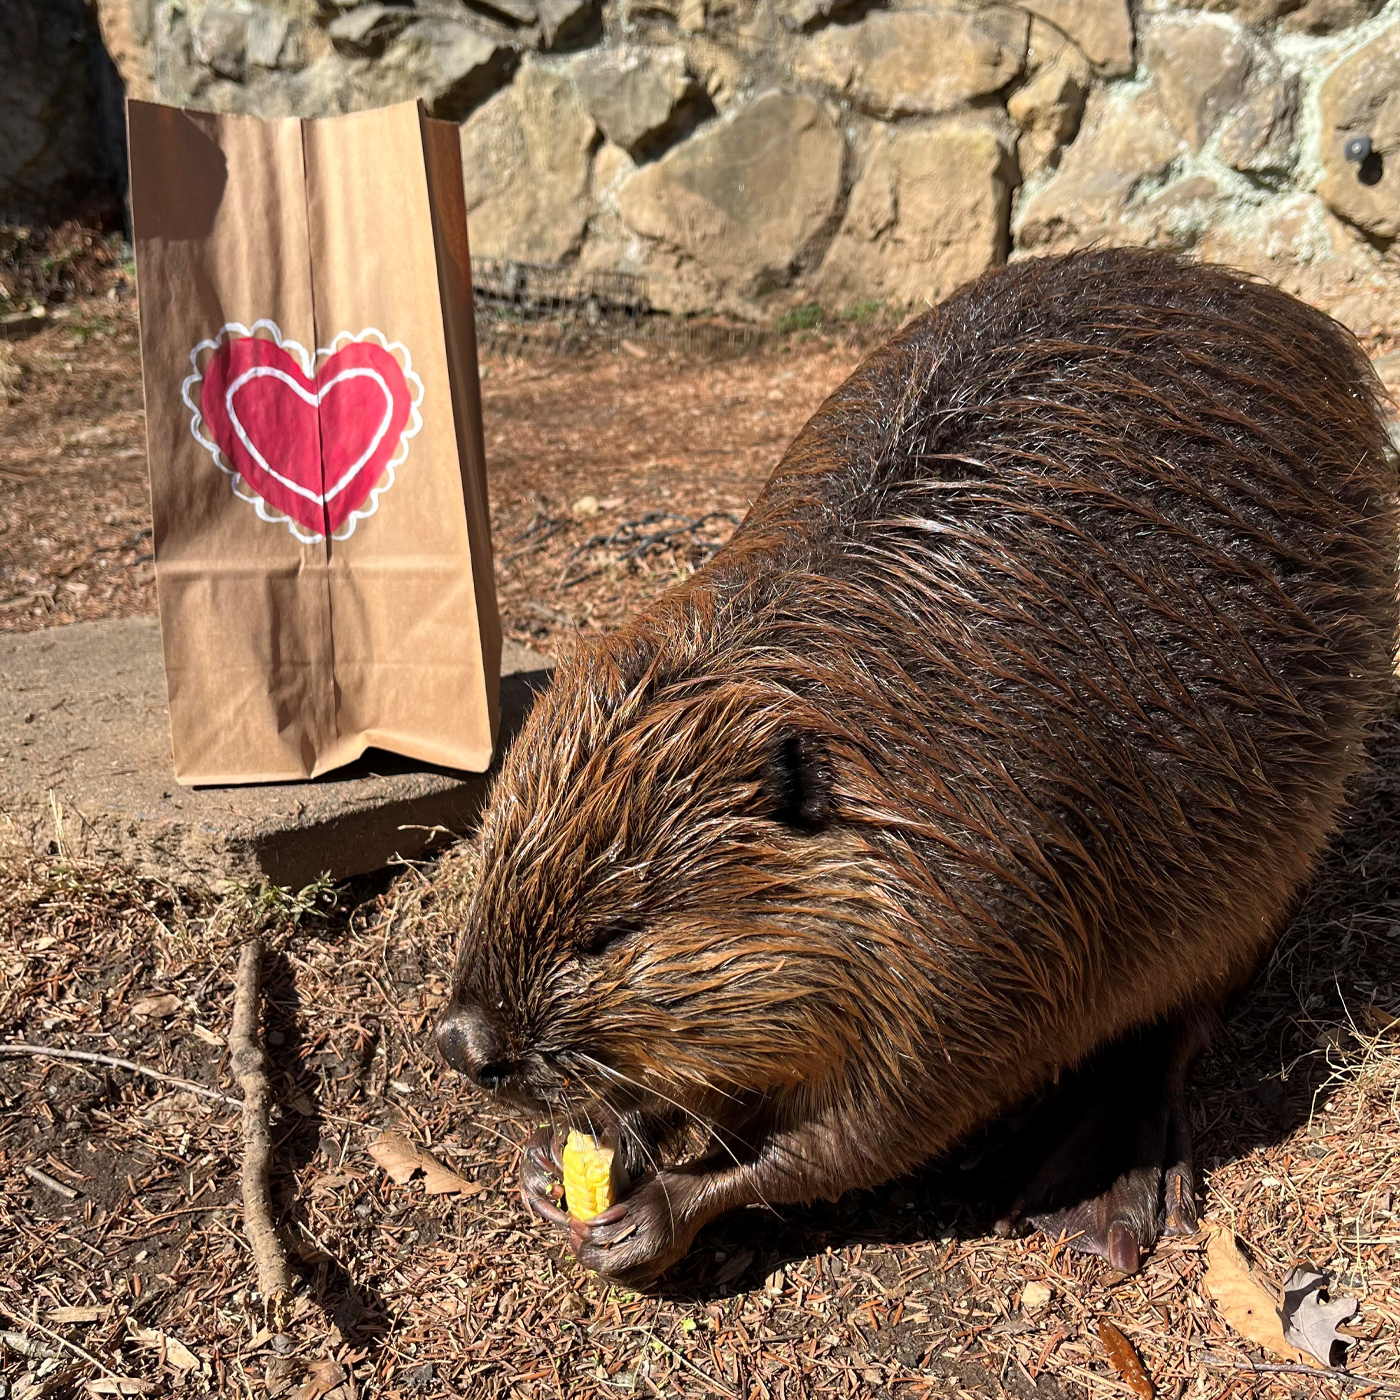 A male beaver munches on a piece of corn next to an enrichment bag with a Valentine's Day heart.